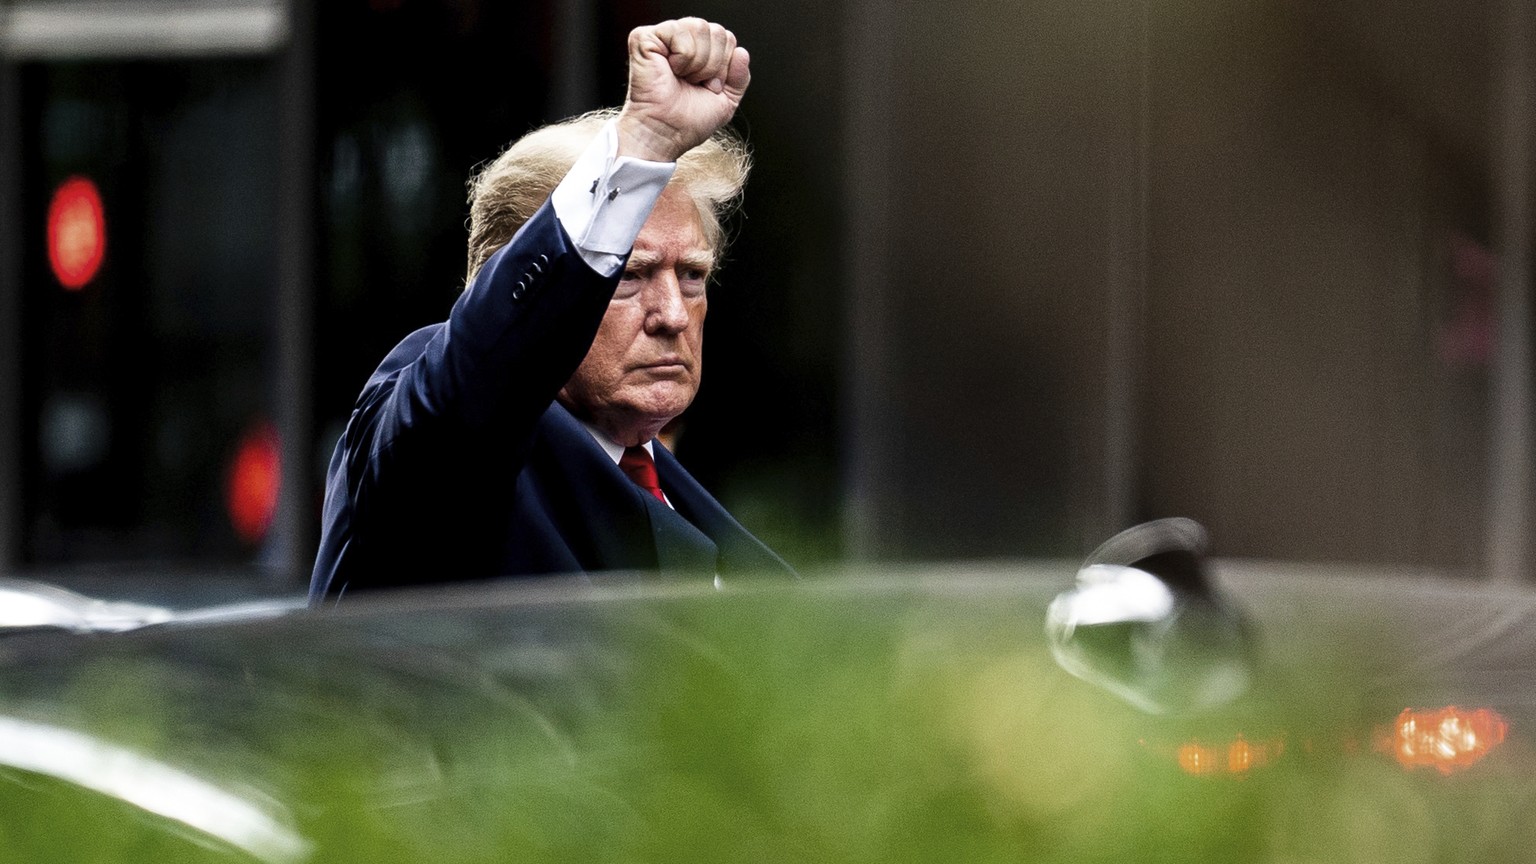 Former President Donald Trump gestures as he departs Trump Tower, Wednesday, Aug. 10, 2022, in New York, on his way to the New York attorney general's office for a deposition in a civil investigation. ...